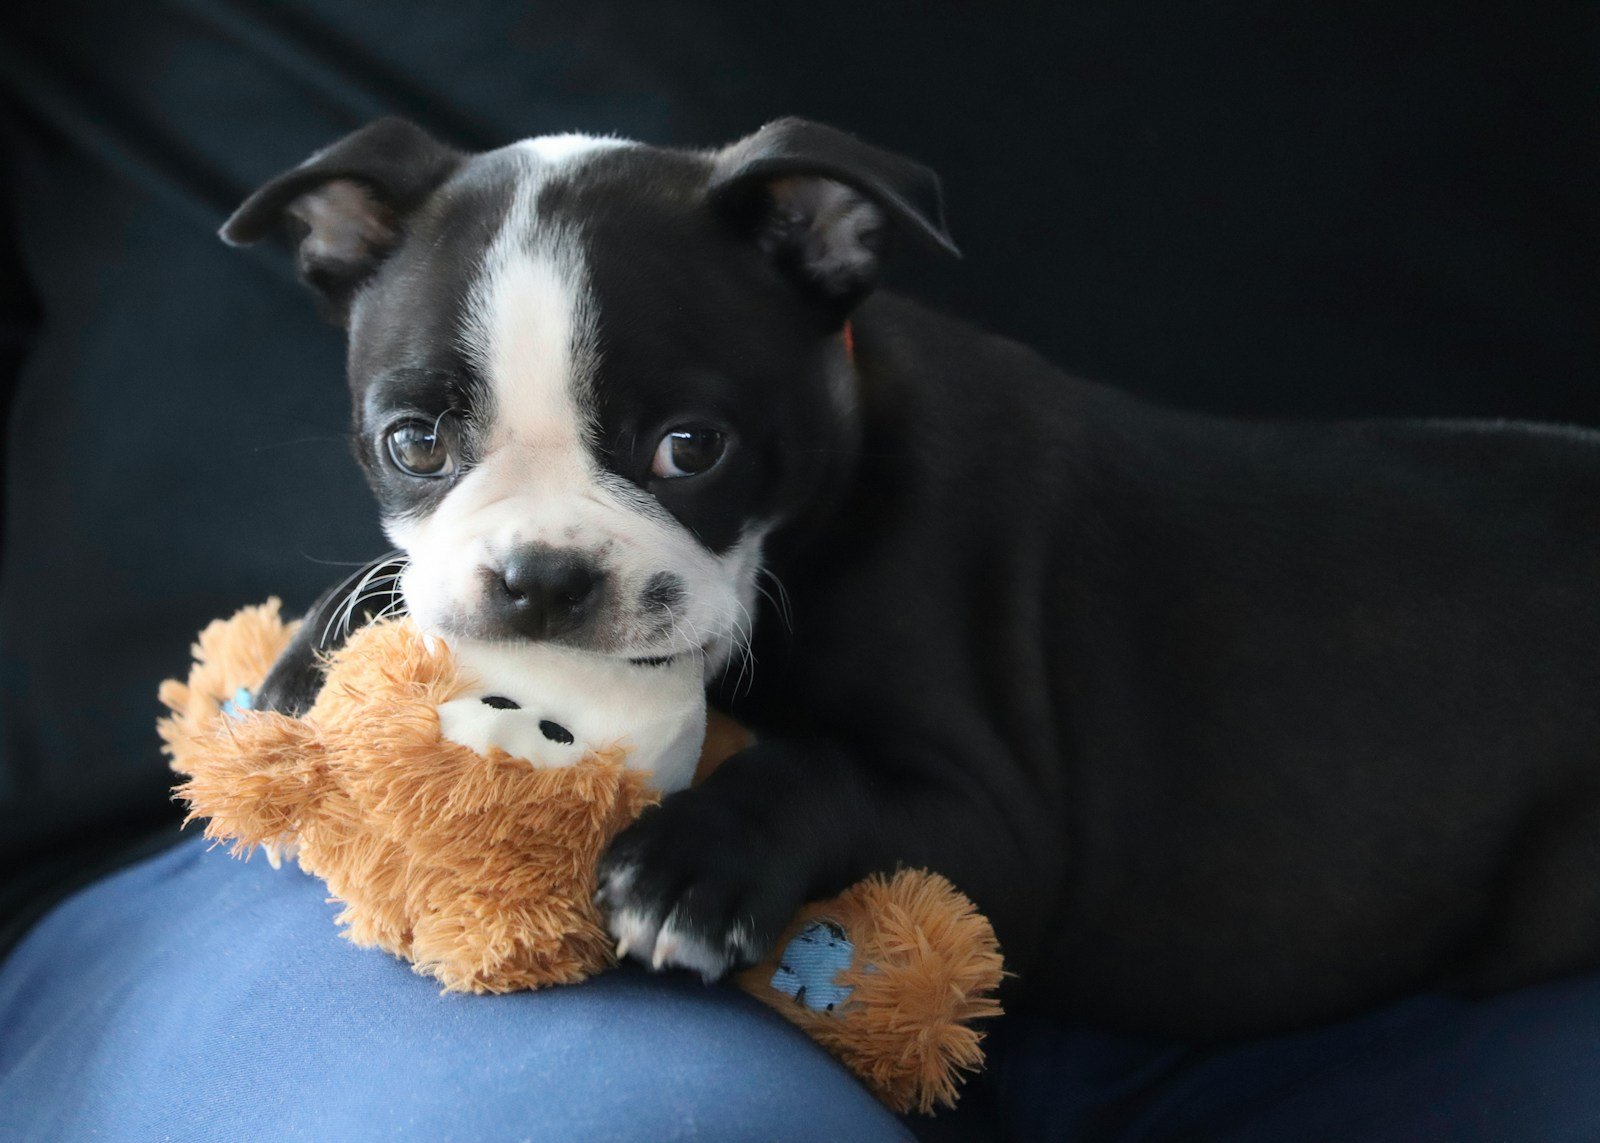 a black and white dog holding a teddy bear